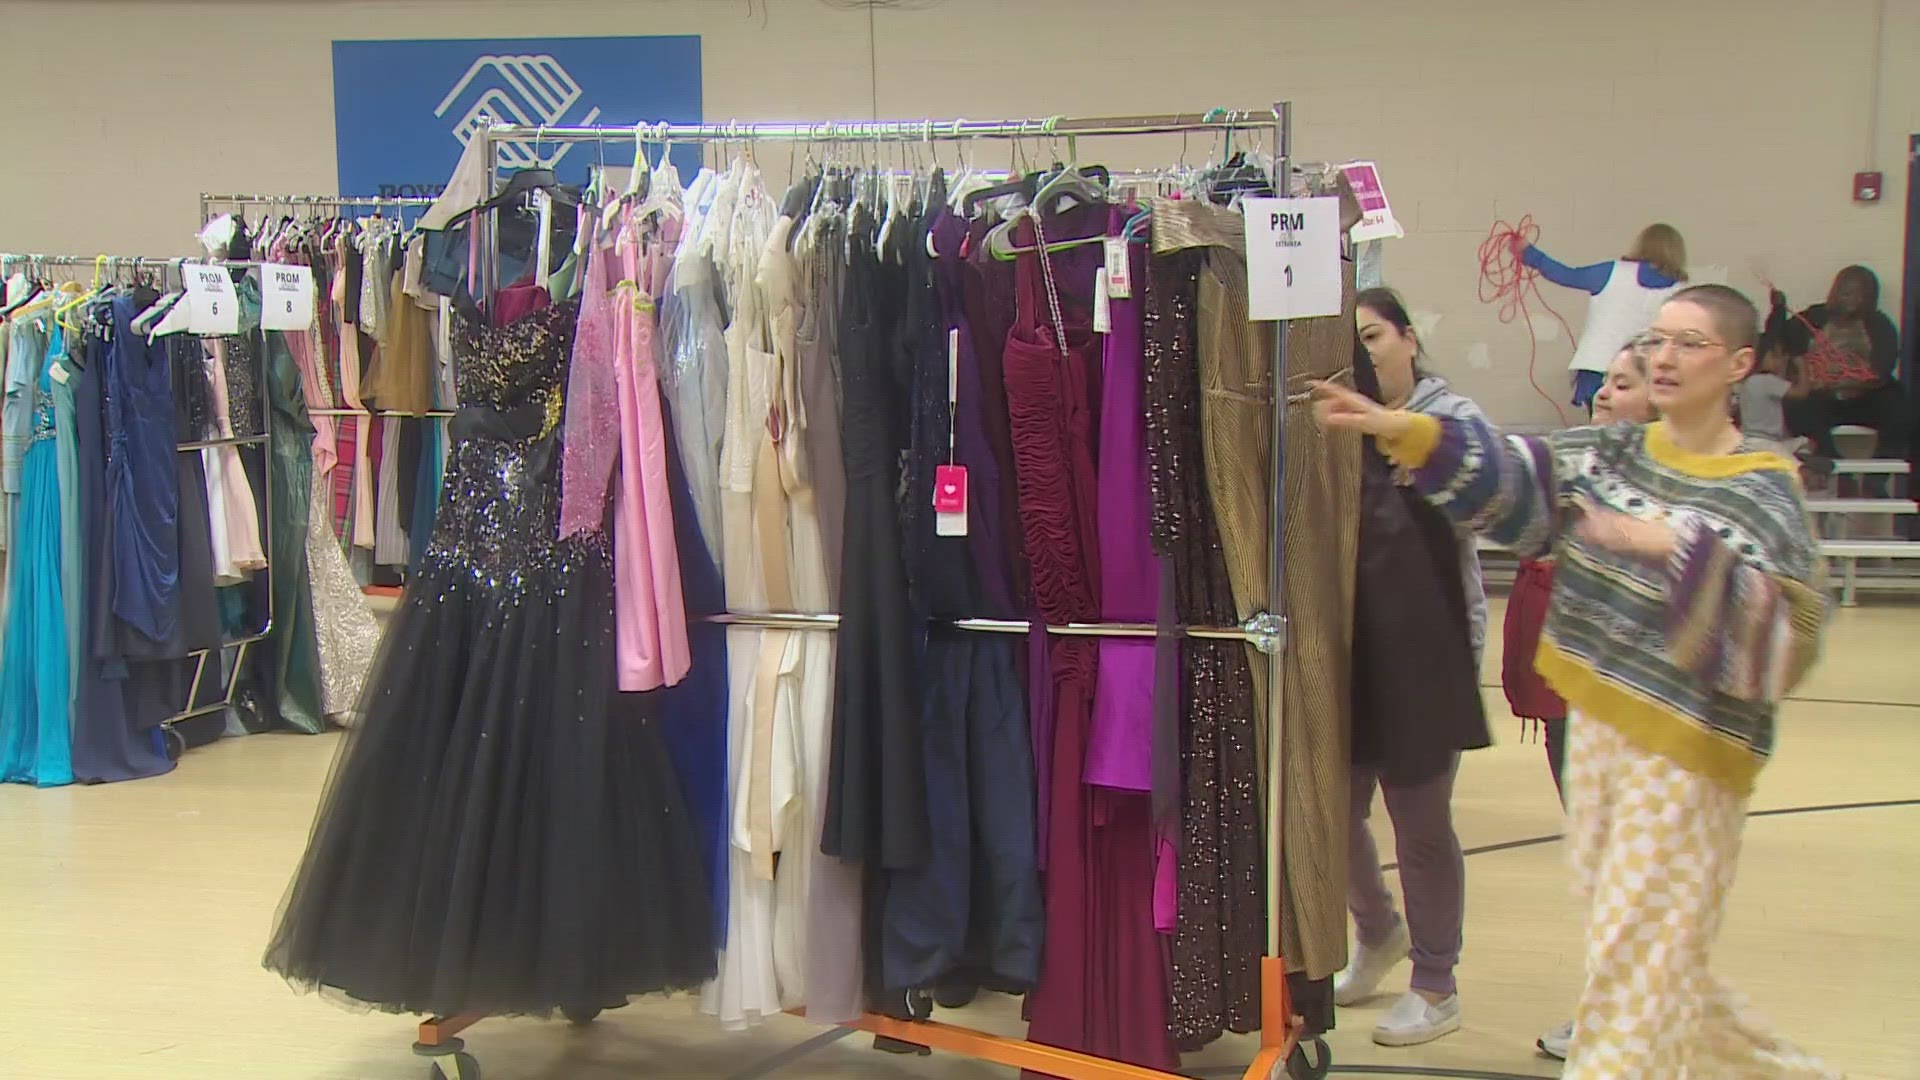 All Dallas-area teens who are attending prom this year are invited to browse through a selection of gently-used gowns, shoes, and accessories.